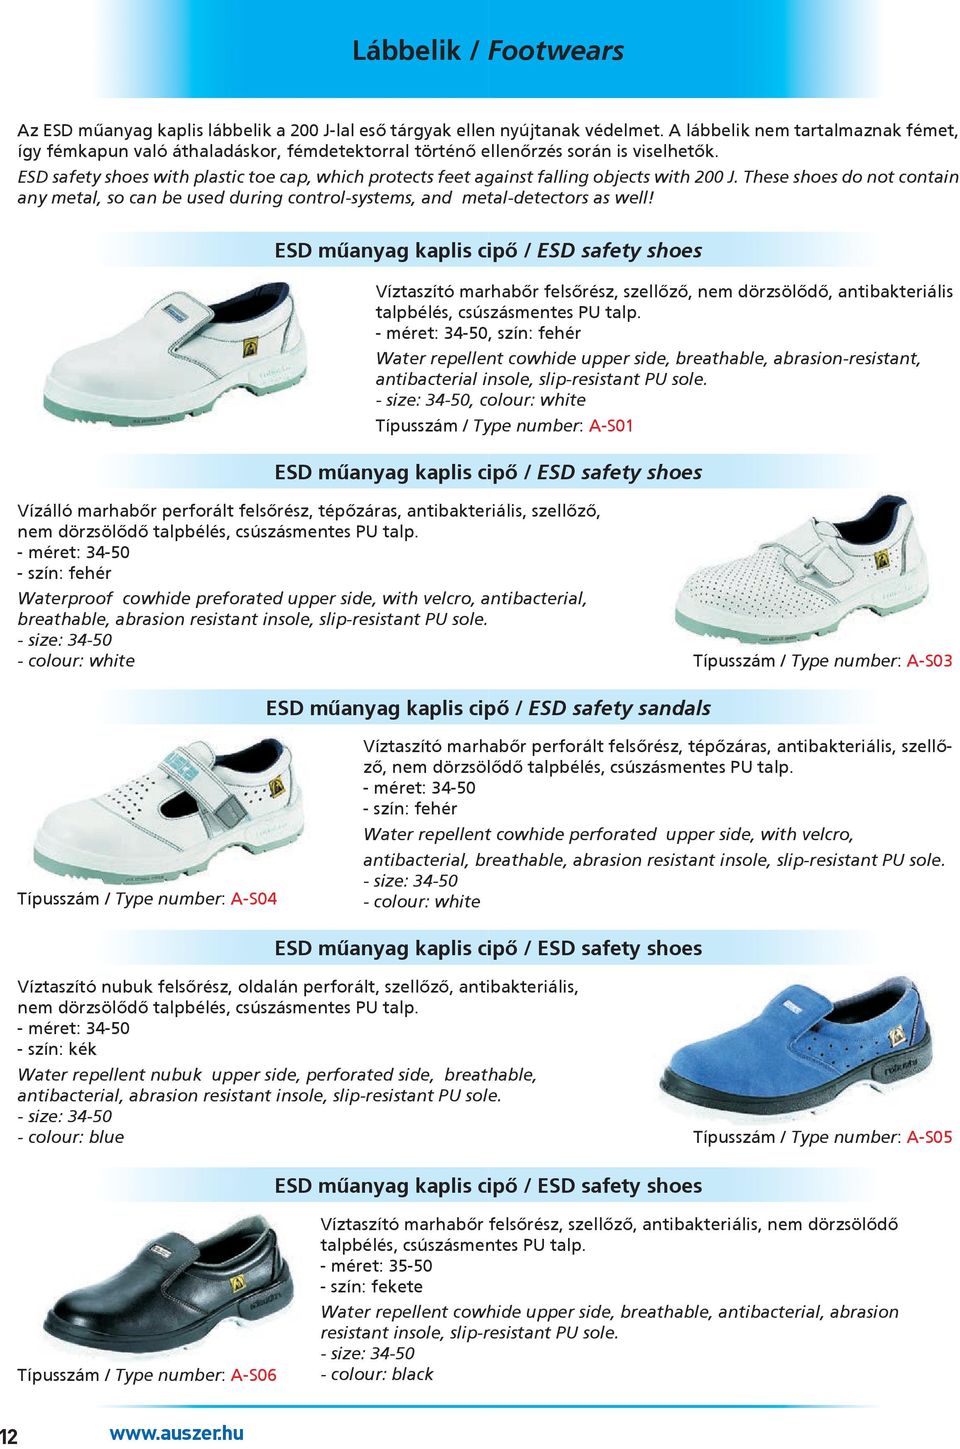 ESD safety shoes with plastic toe cap, which protects feet against falling objects with 200 J. These shoes do not contain any metal, so can be used during control-systems, and metal-detectors as well!